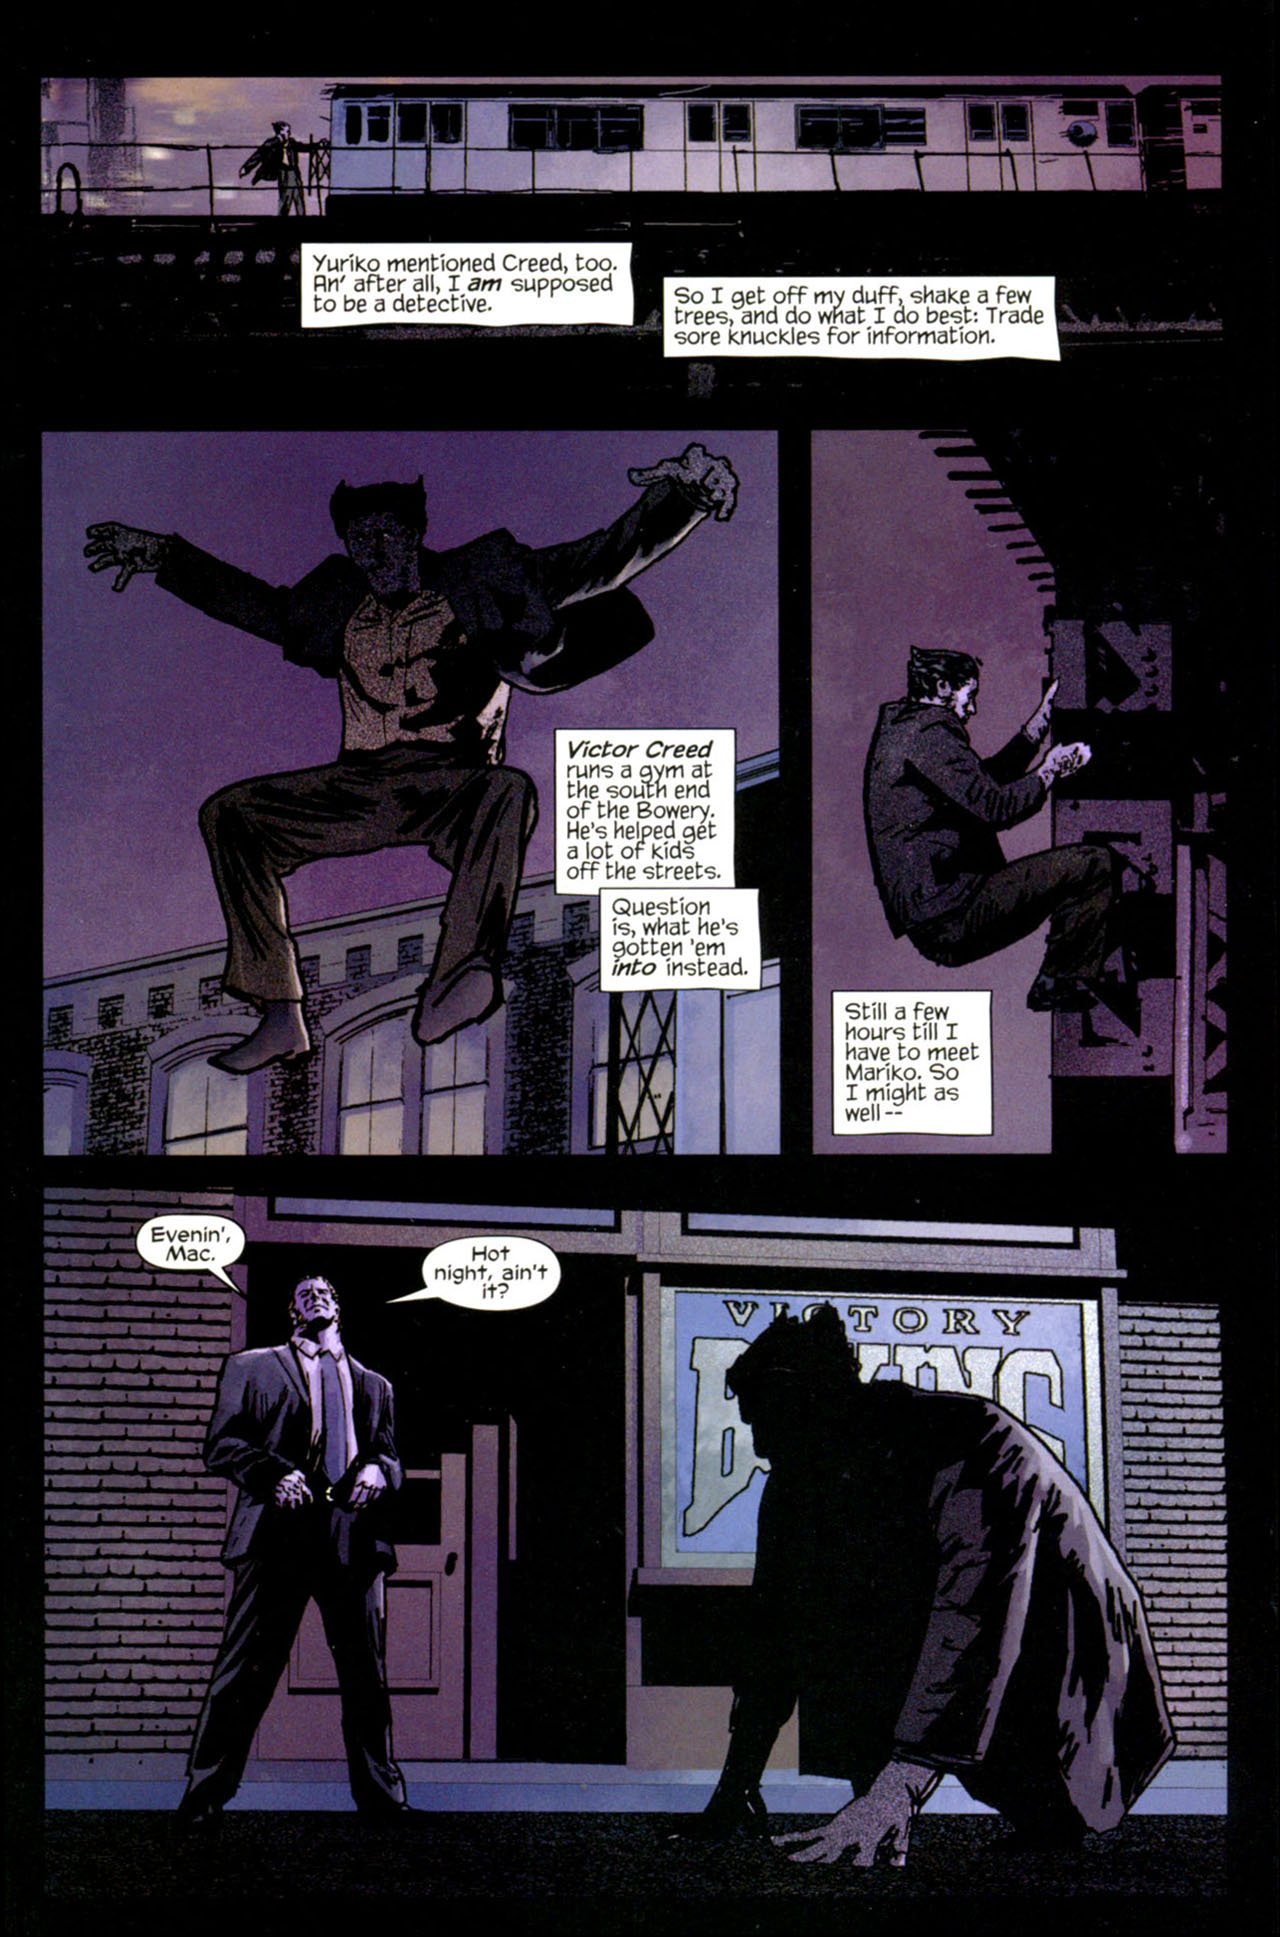 Wolverine Noir #2 (of 4) - Alley Cats